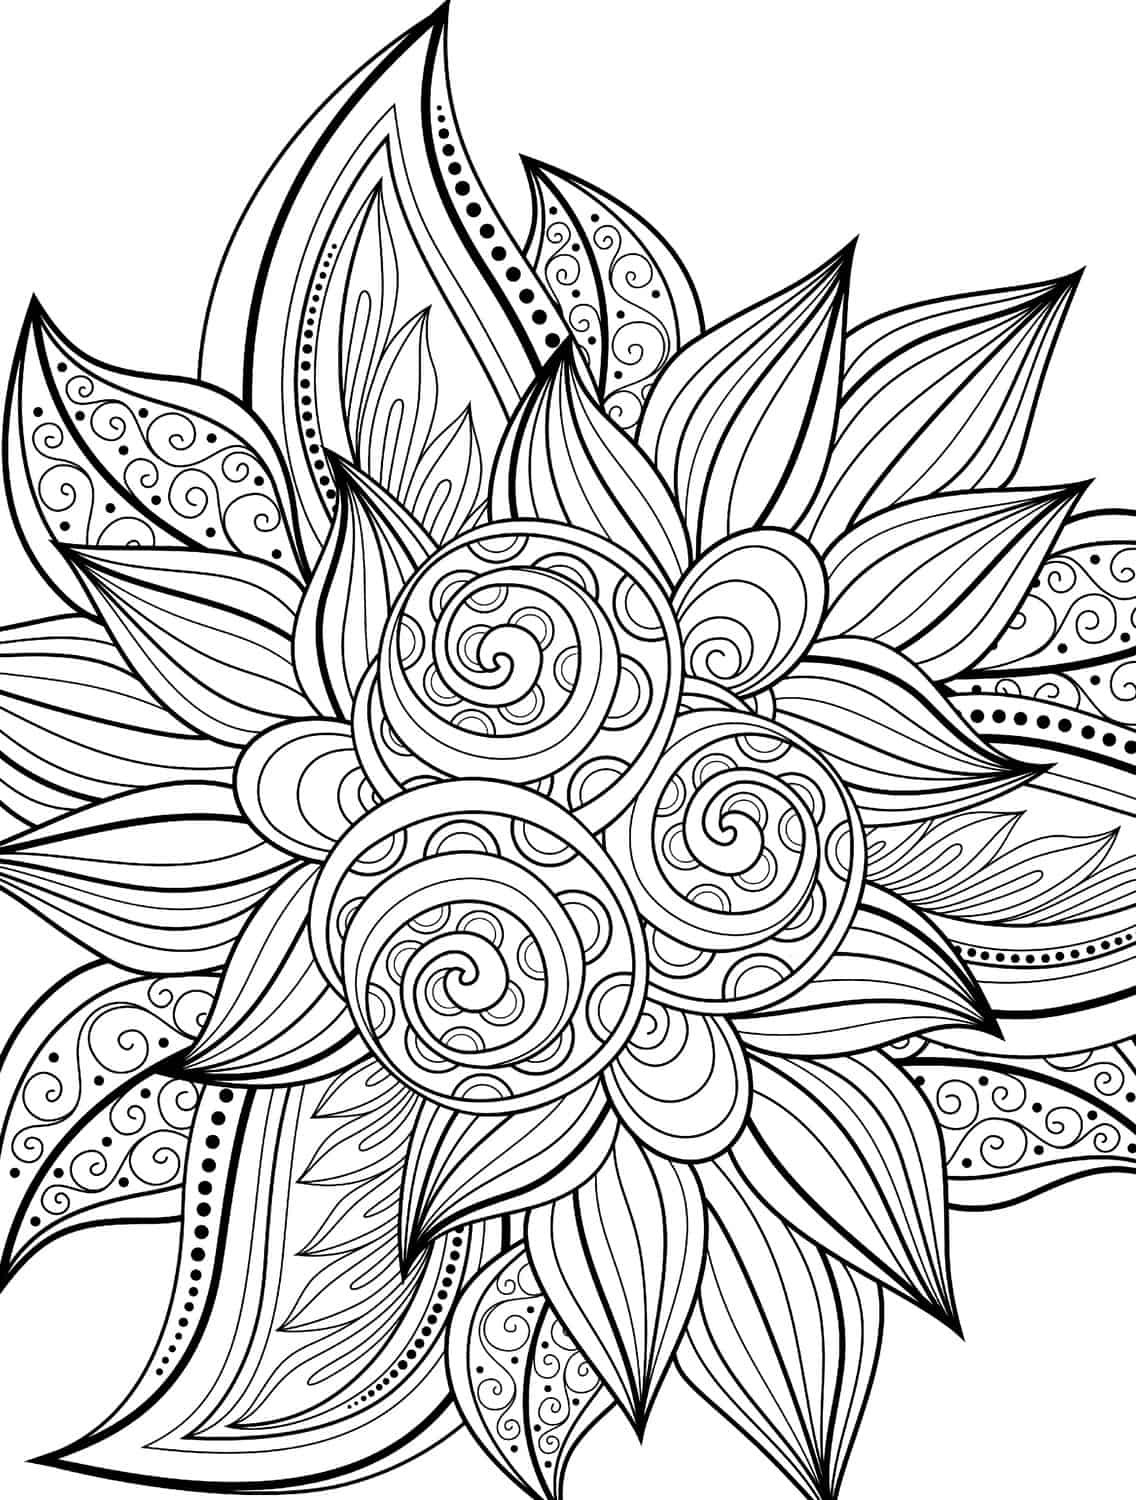 Awesome Coloring Pages For Adults
 10 Free Printable Holiday Adult Coloring Pages